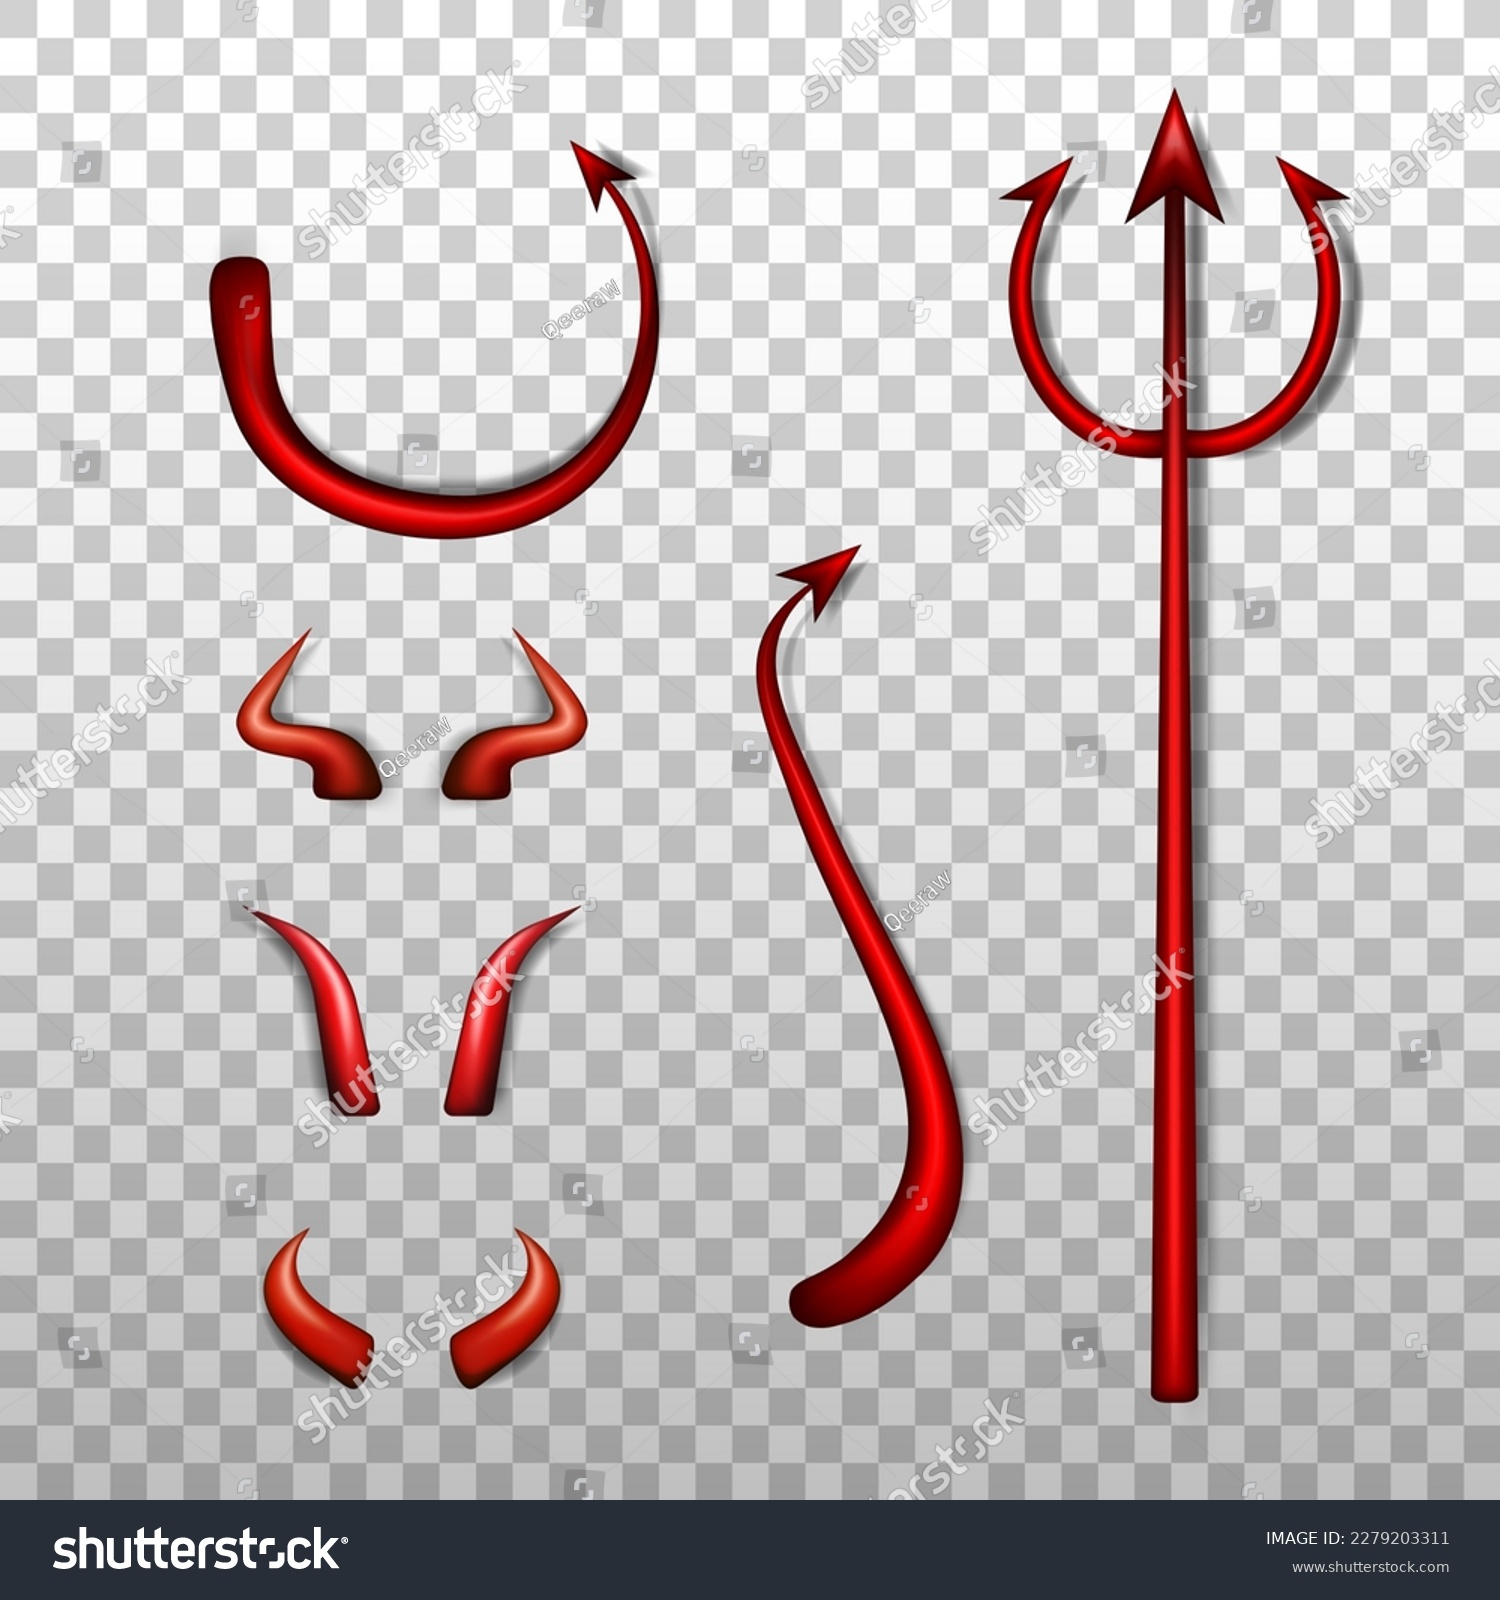 SVG of Collection of realistic 3d devil costume elements - red bloody trident, glossy horns various shape and different demon tails on transparent background. Satan decoration, Monster carnival element.  svg